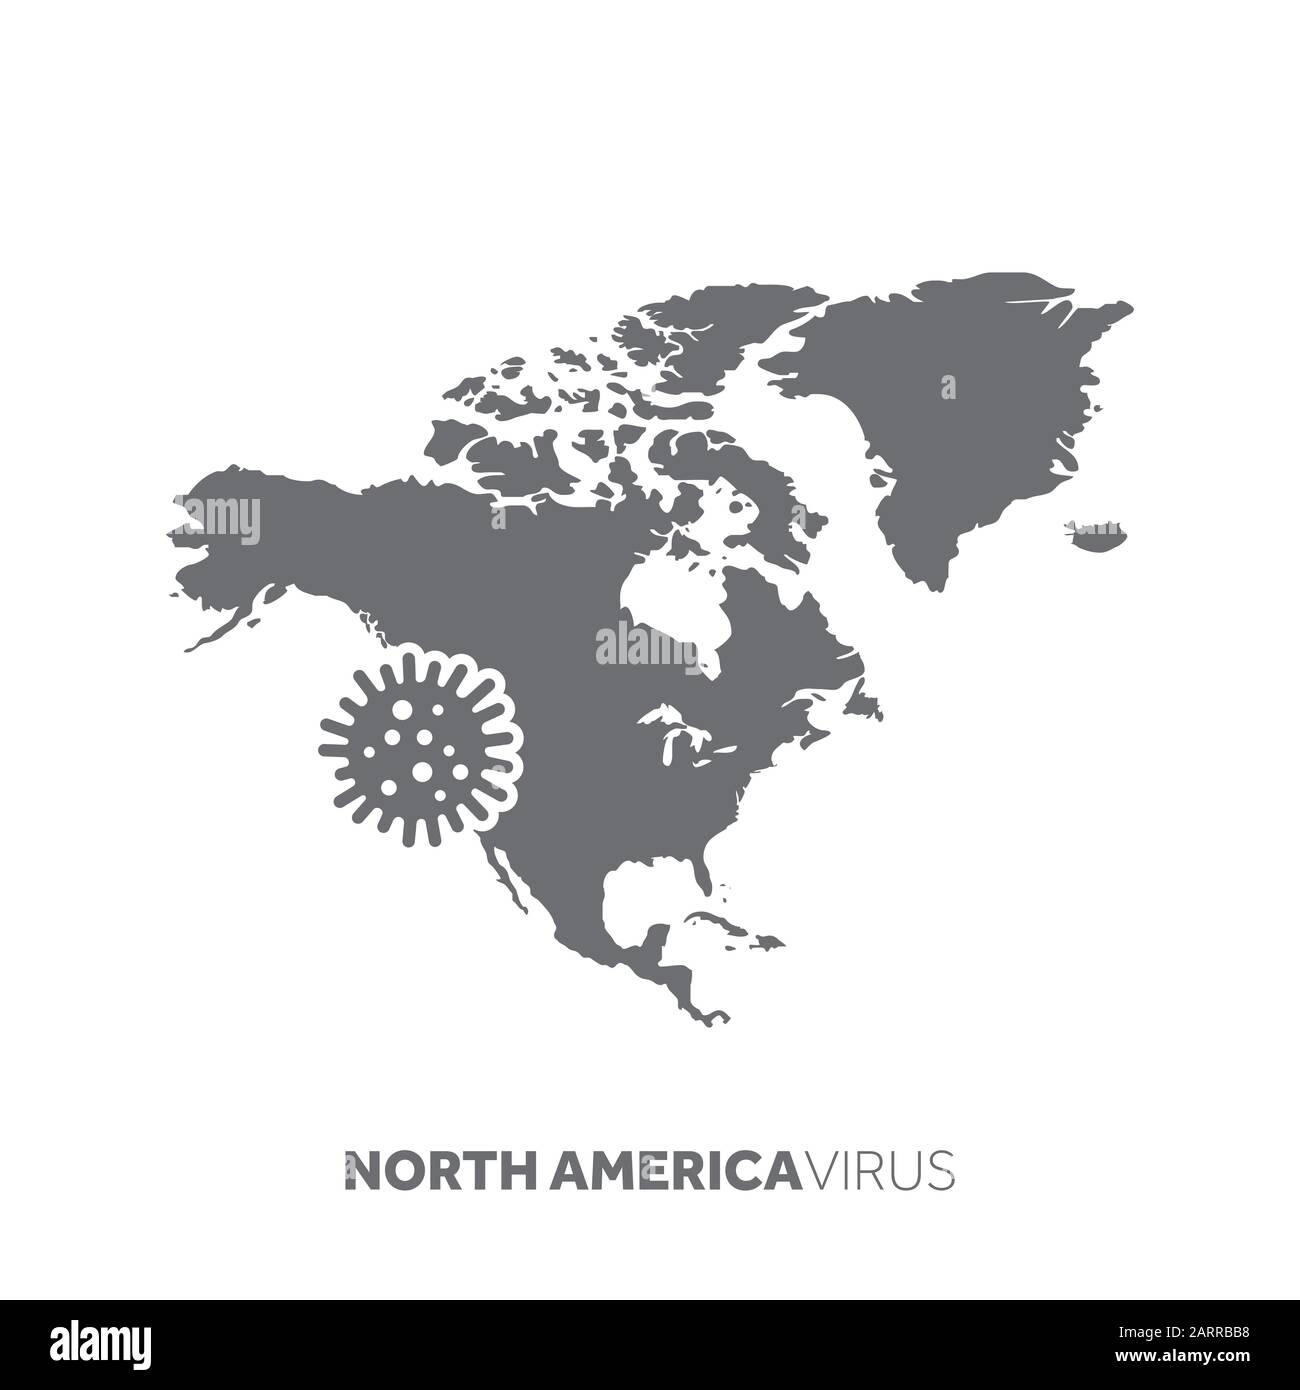 North America map with a virus microbe. Illness and disease outbreak Stock Vector